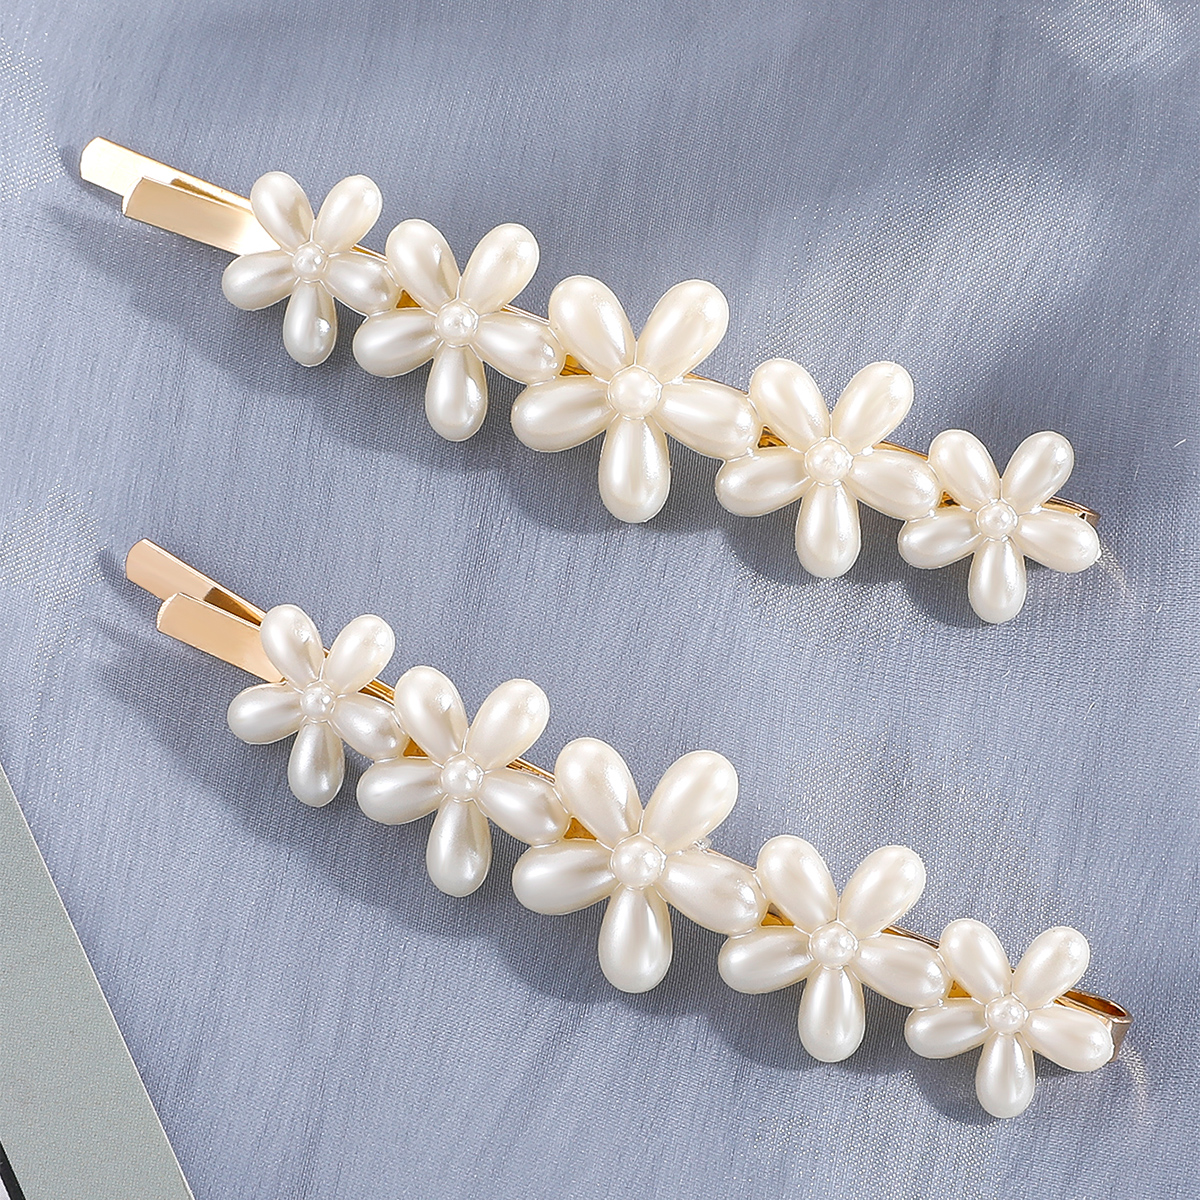 WomenS Romantic Sweet Flower Imitation Pearl Alloy Hair Accessories Inlaid Pearls Artificial Pearls Hair Clip 1 Setpicture1